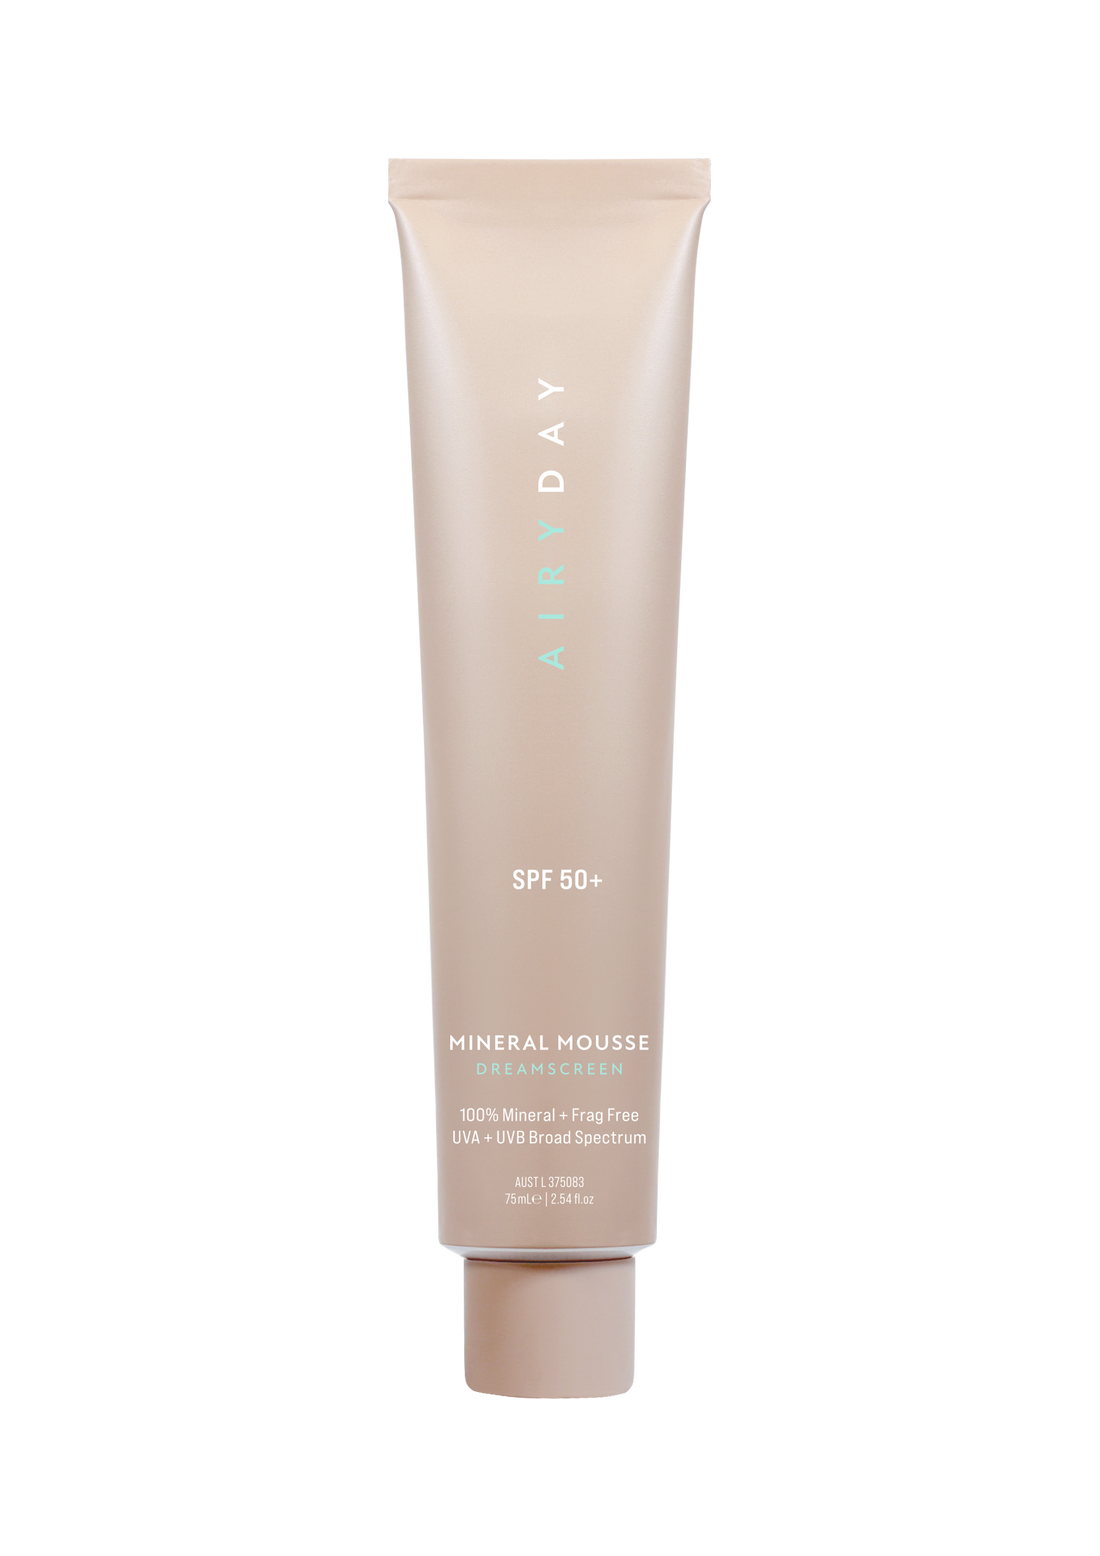 Airy day Mineral mousse SPF50+ dreamscreen